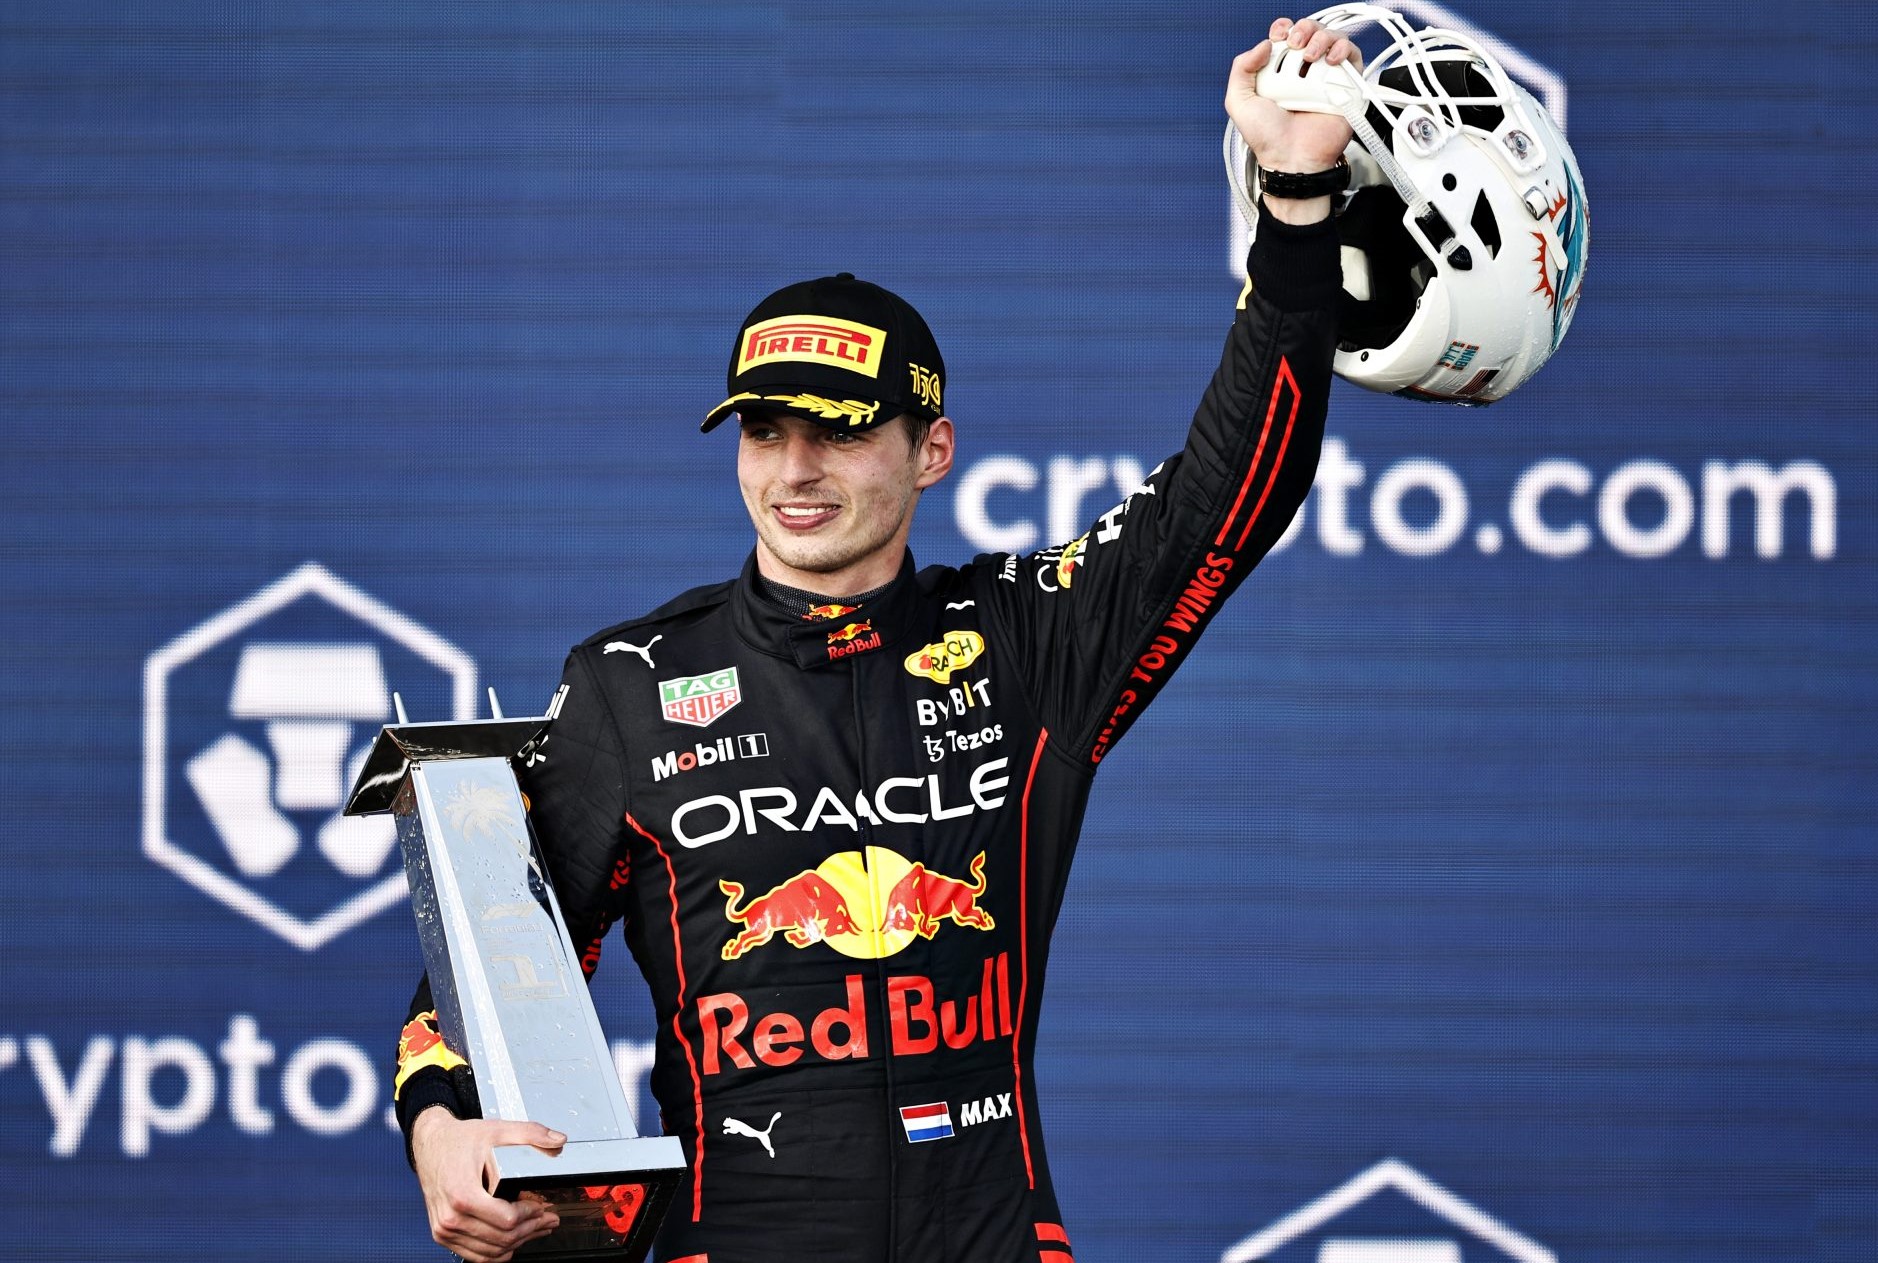 Verstappen edges out Leclerc to win inaugural Miami Grand Prix